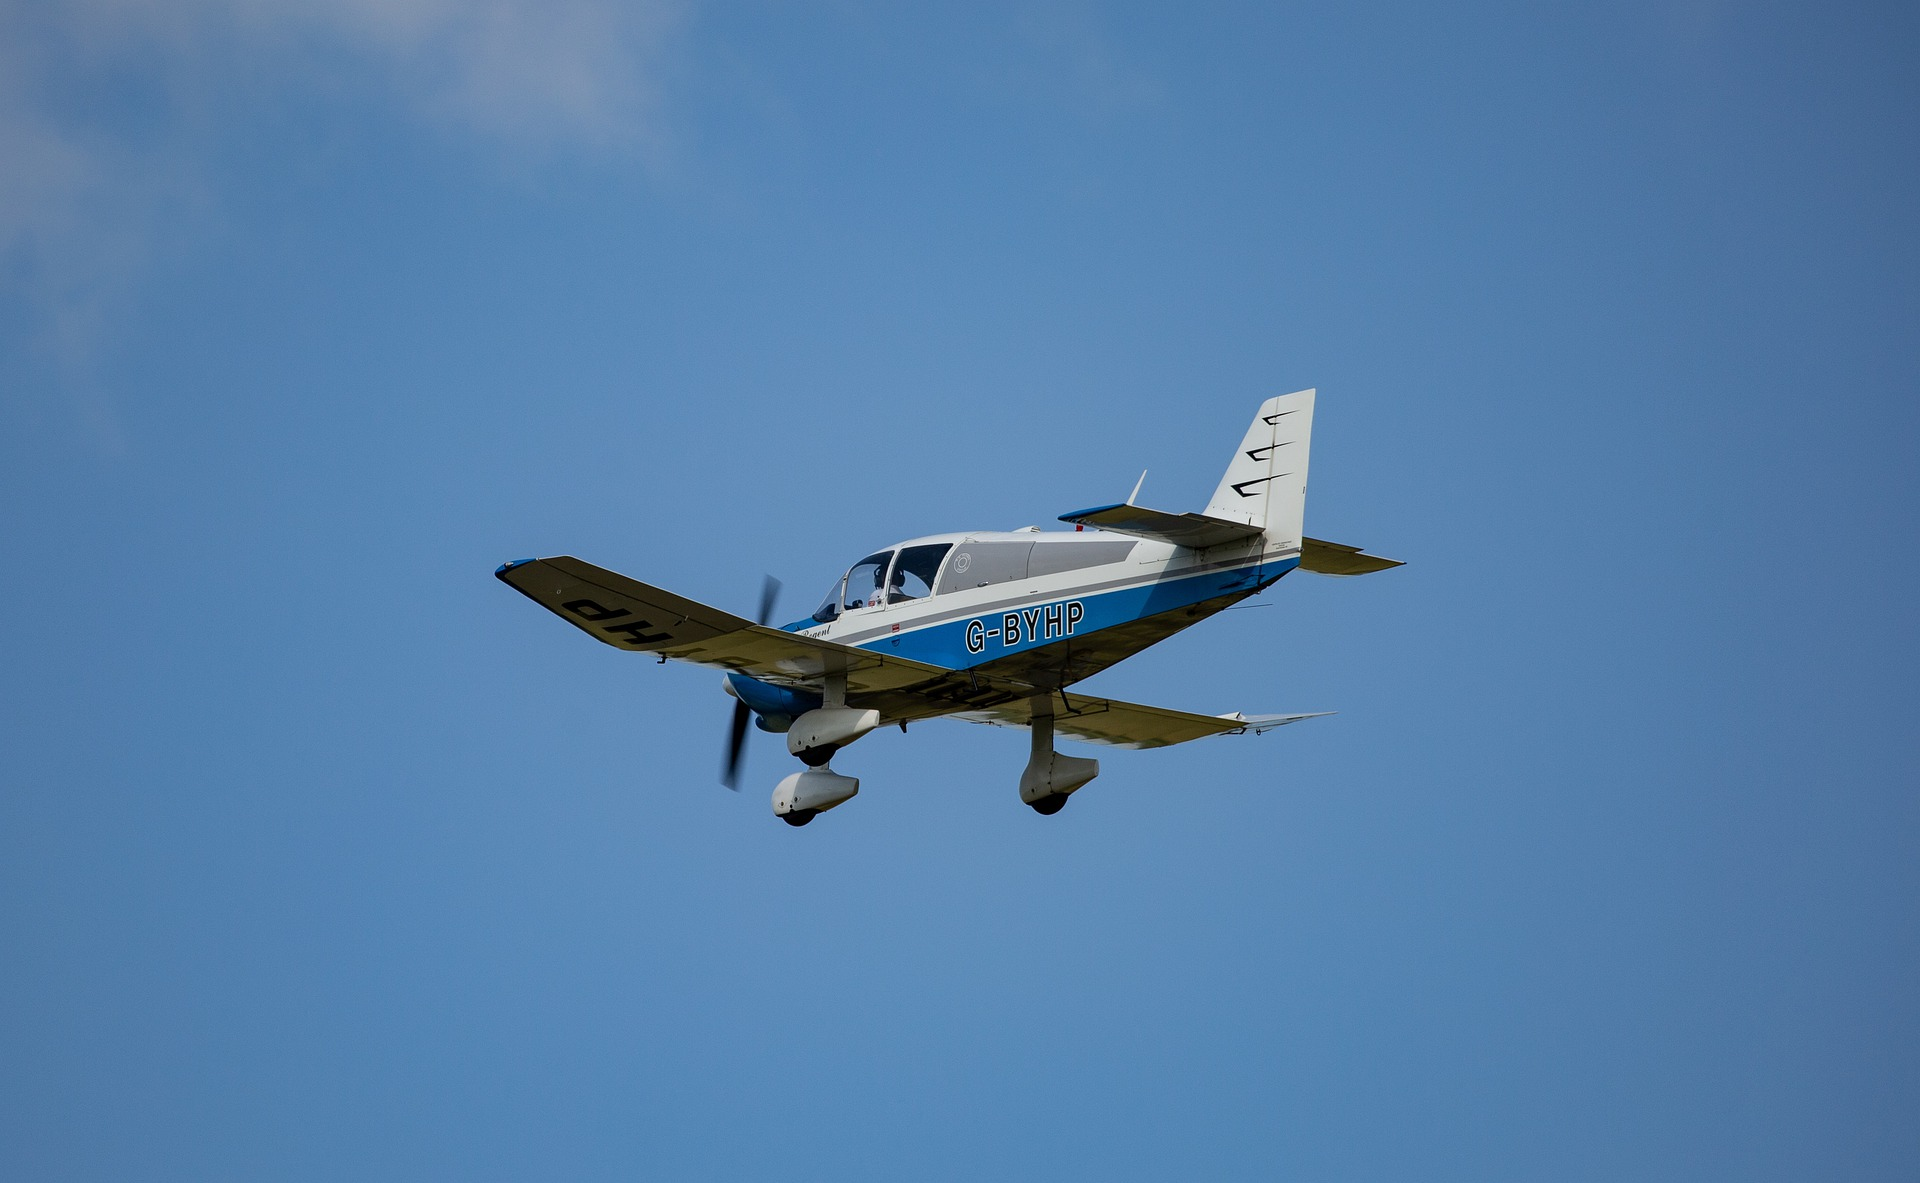 A small aircraft flying under marginal conditions for VFR.